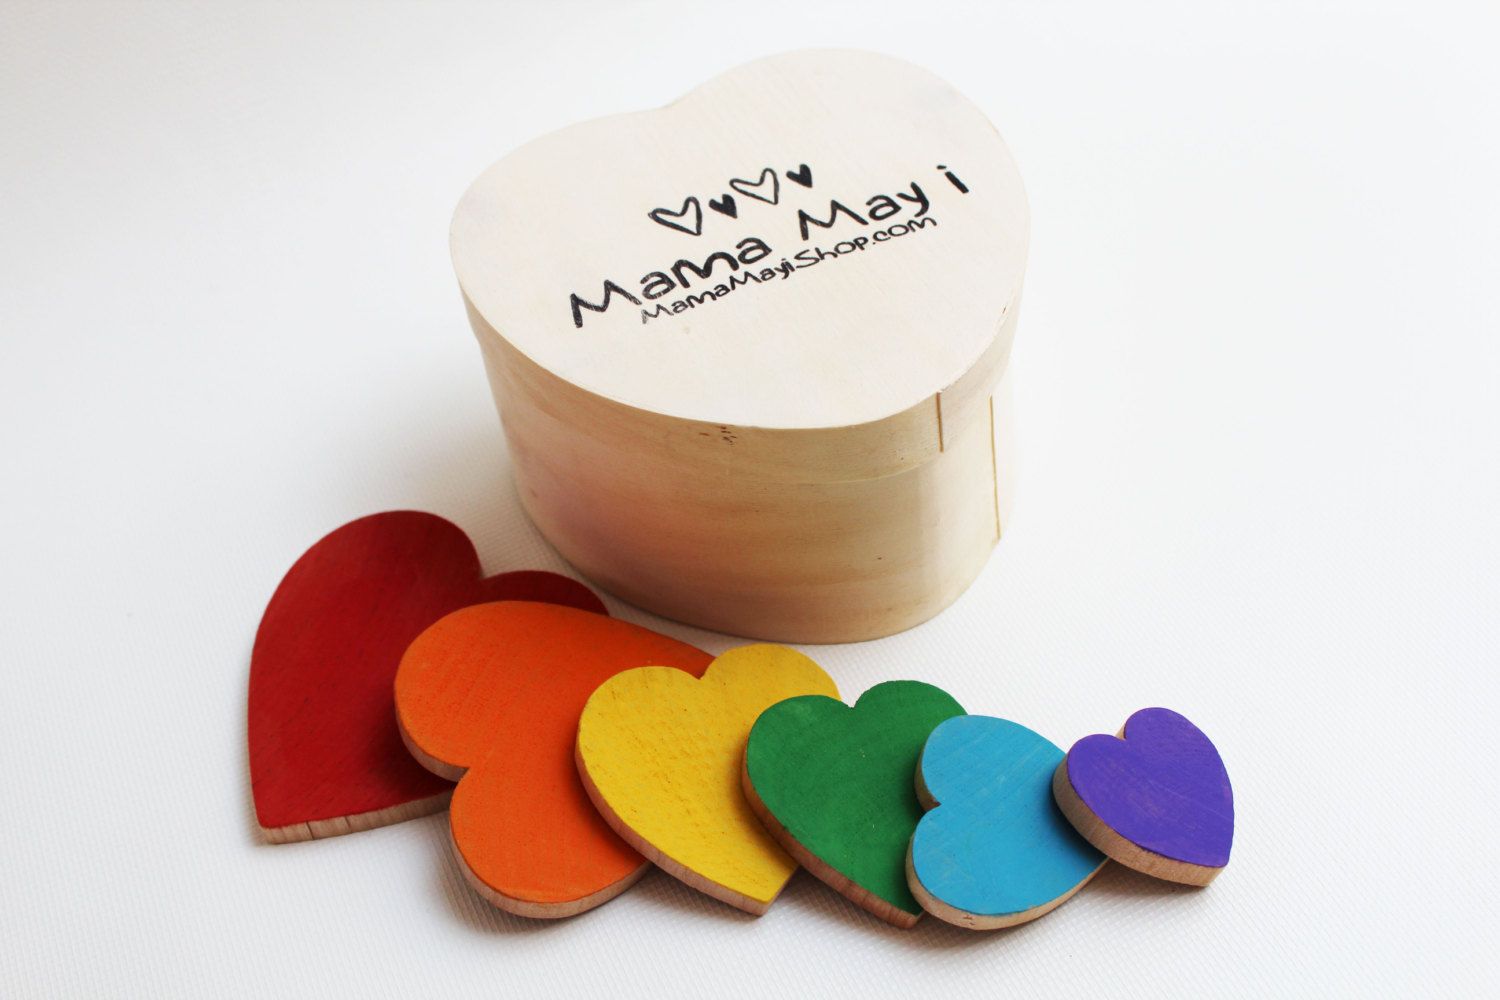 Handmade rainbow wooden heart Waldorf sizing game | Cool Valentine's Day gift ideas for kids